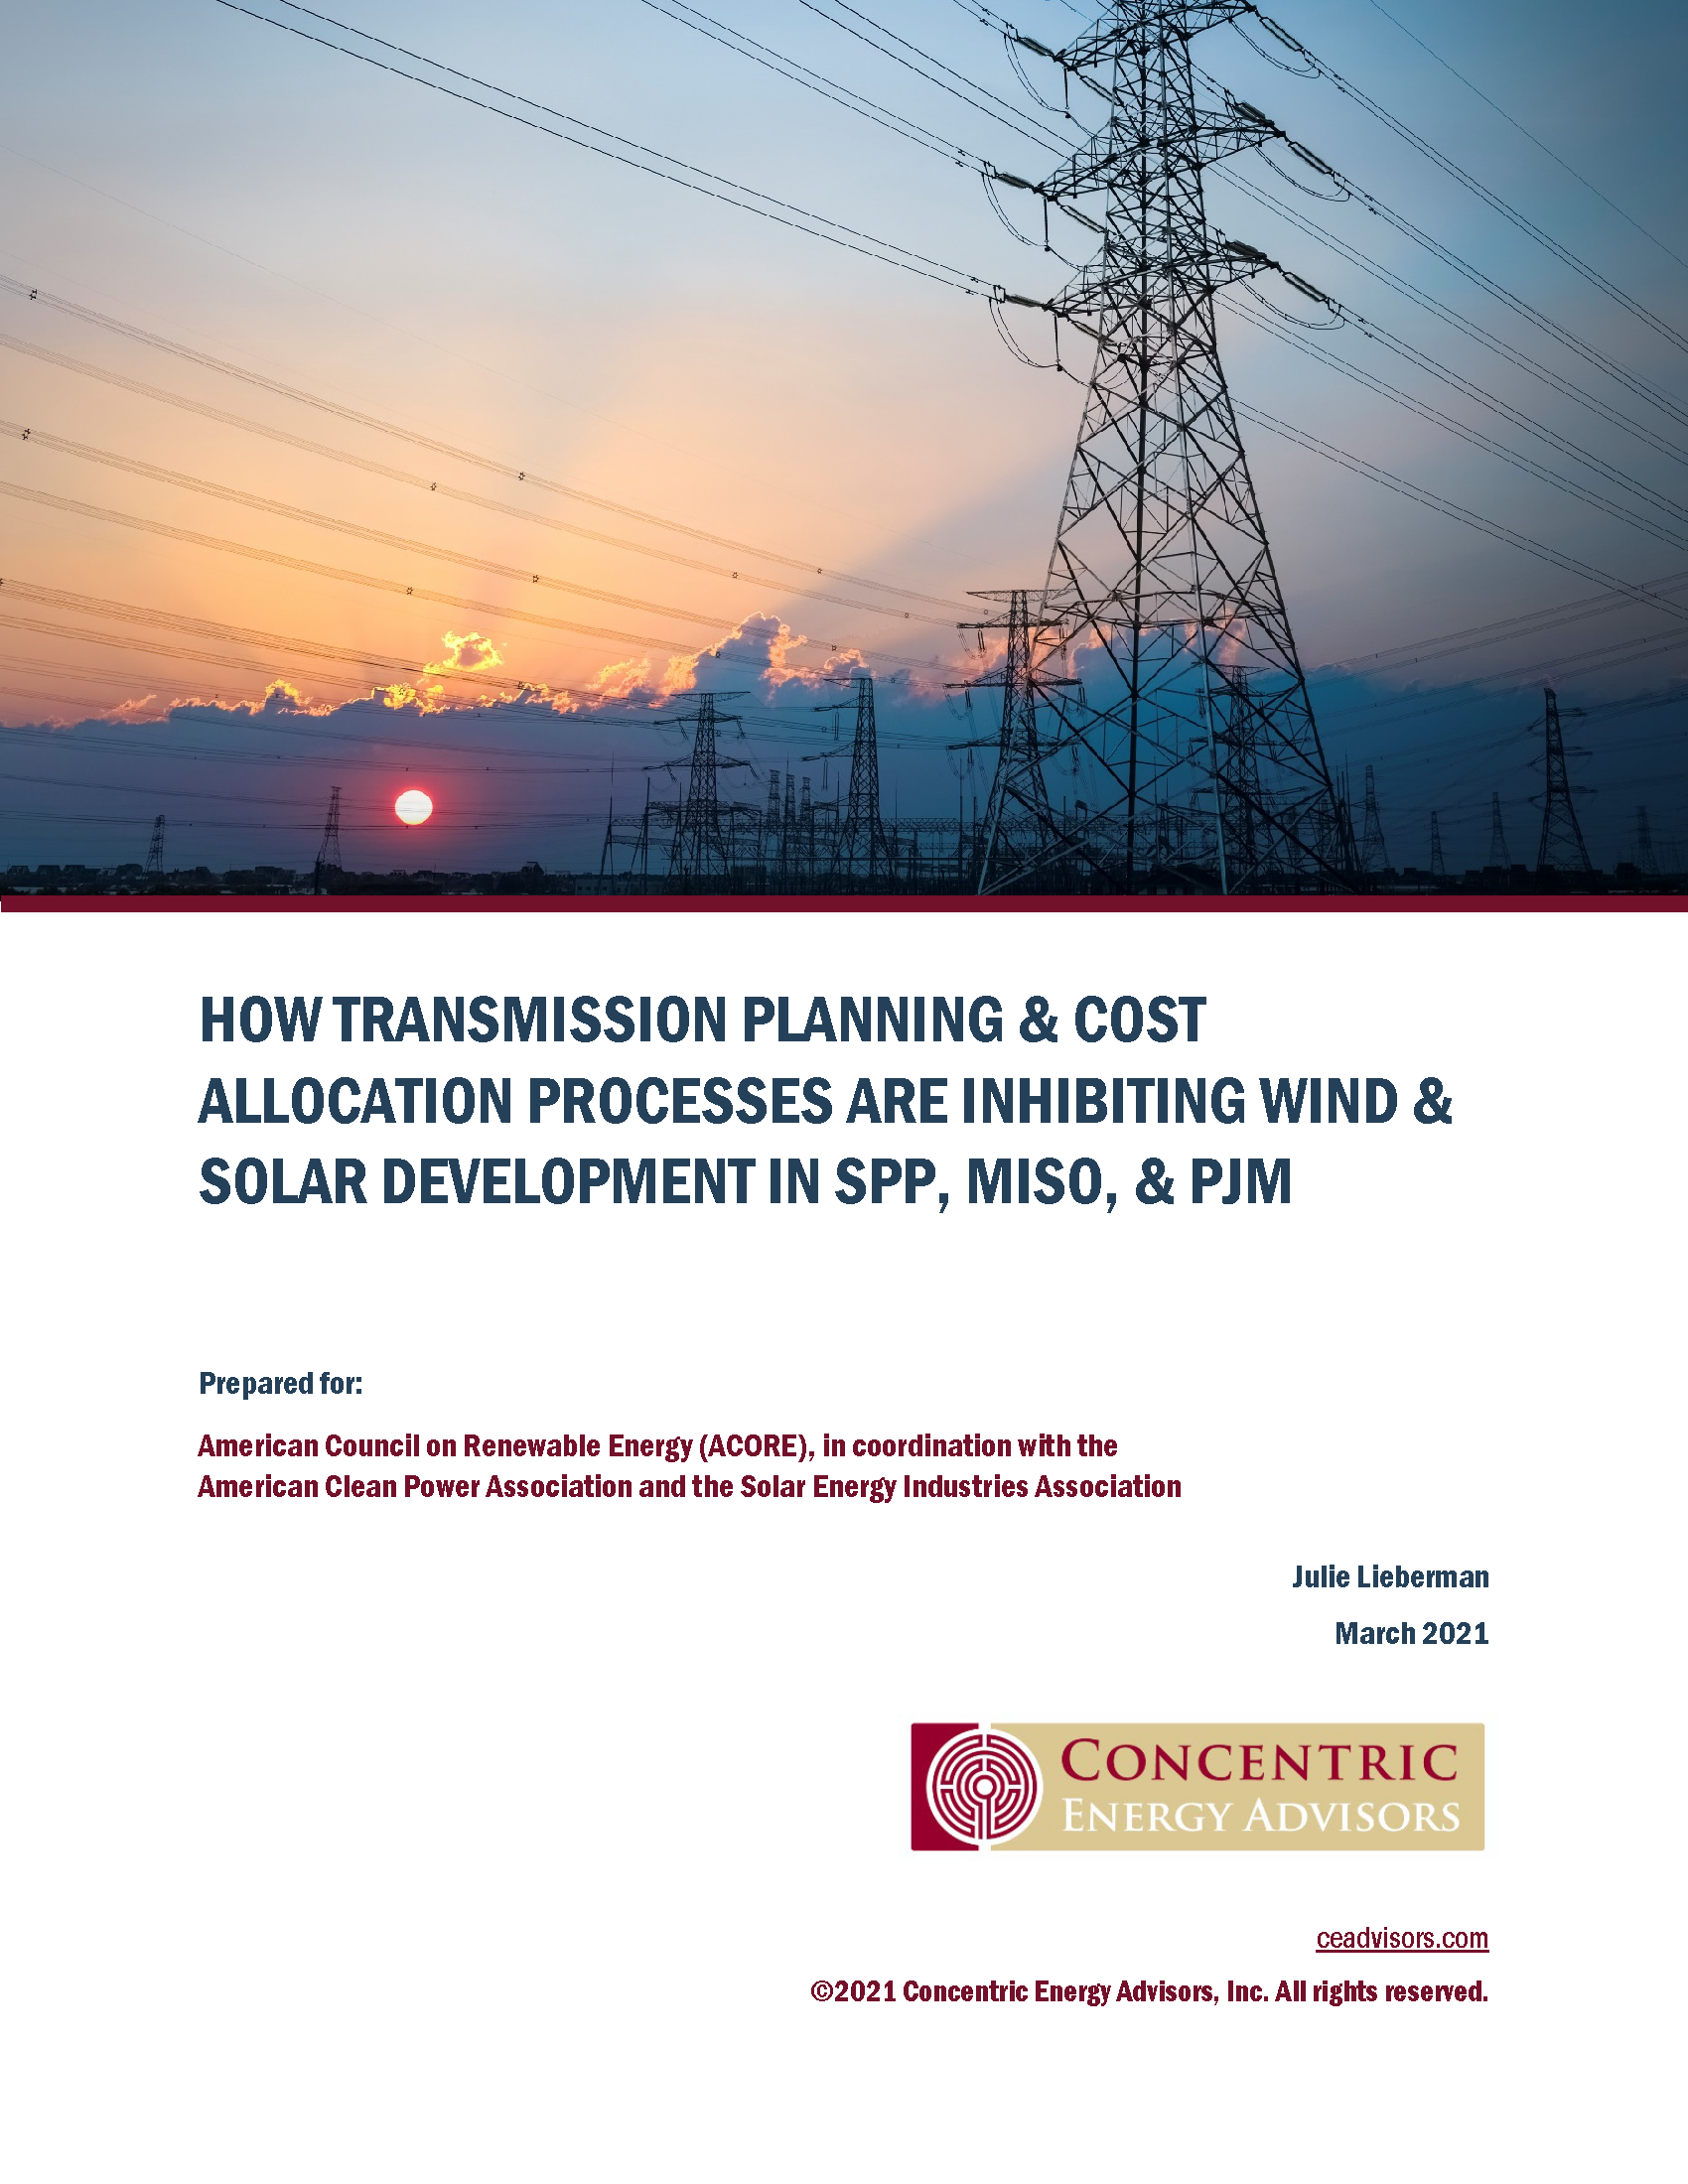 How Transmission Planning & Cost Allocation Processes Are Inhibiting Wind & Solar Development in SPP, MISO, & PJM; prepared by Concentric Energy Advisors; Report cover includes an image of transmission towers and mires